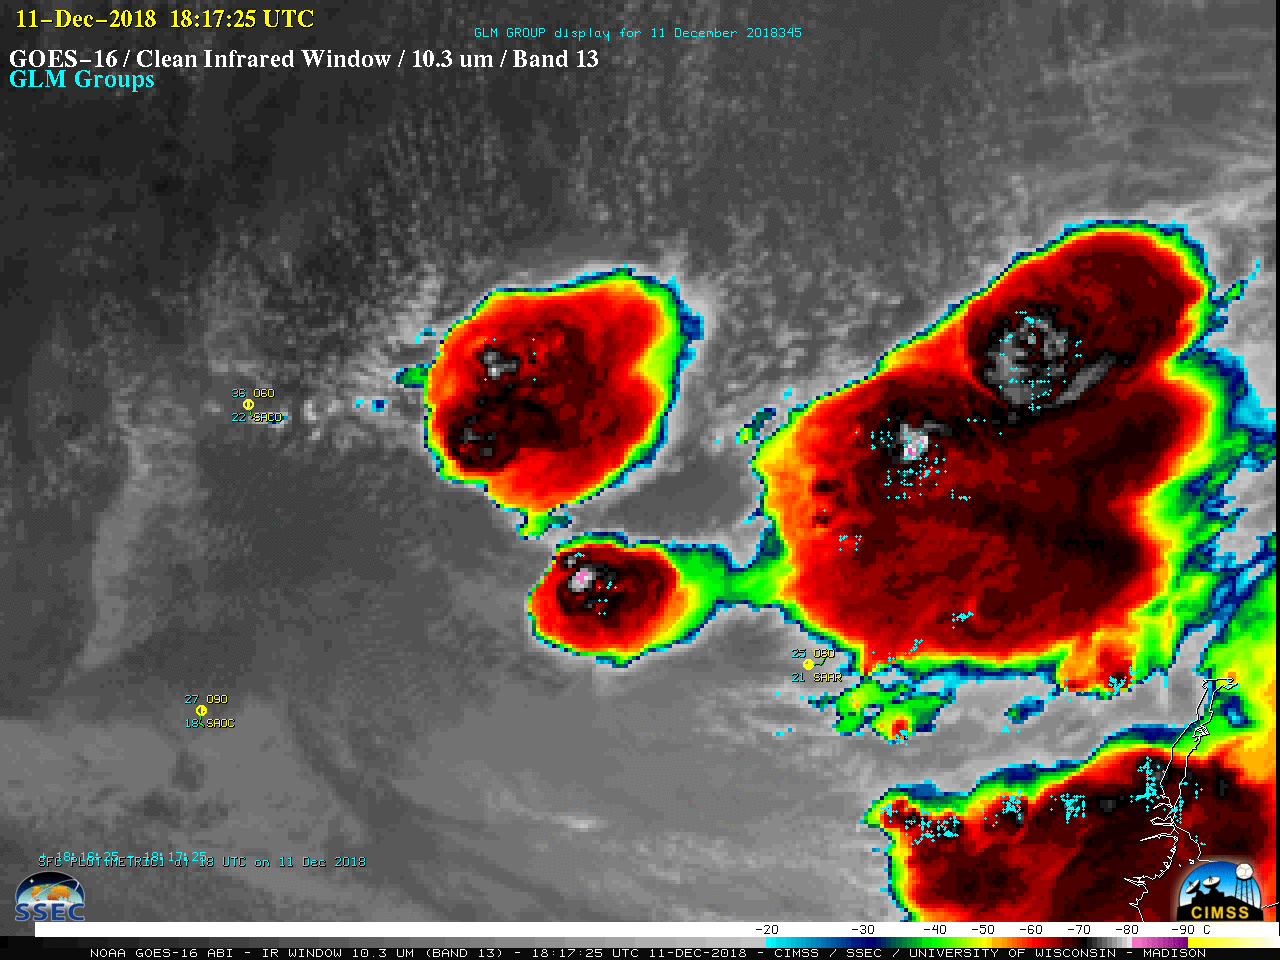 GOES-16 "Clean" Infrared Window (10.3 µm) images, with GLM Groups plotted cyan [click to play MP4 animation]